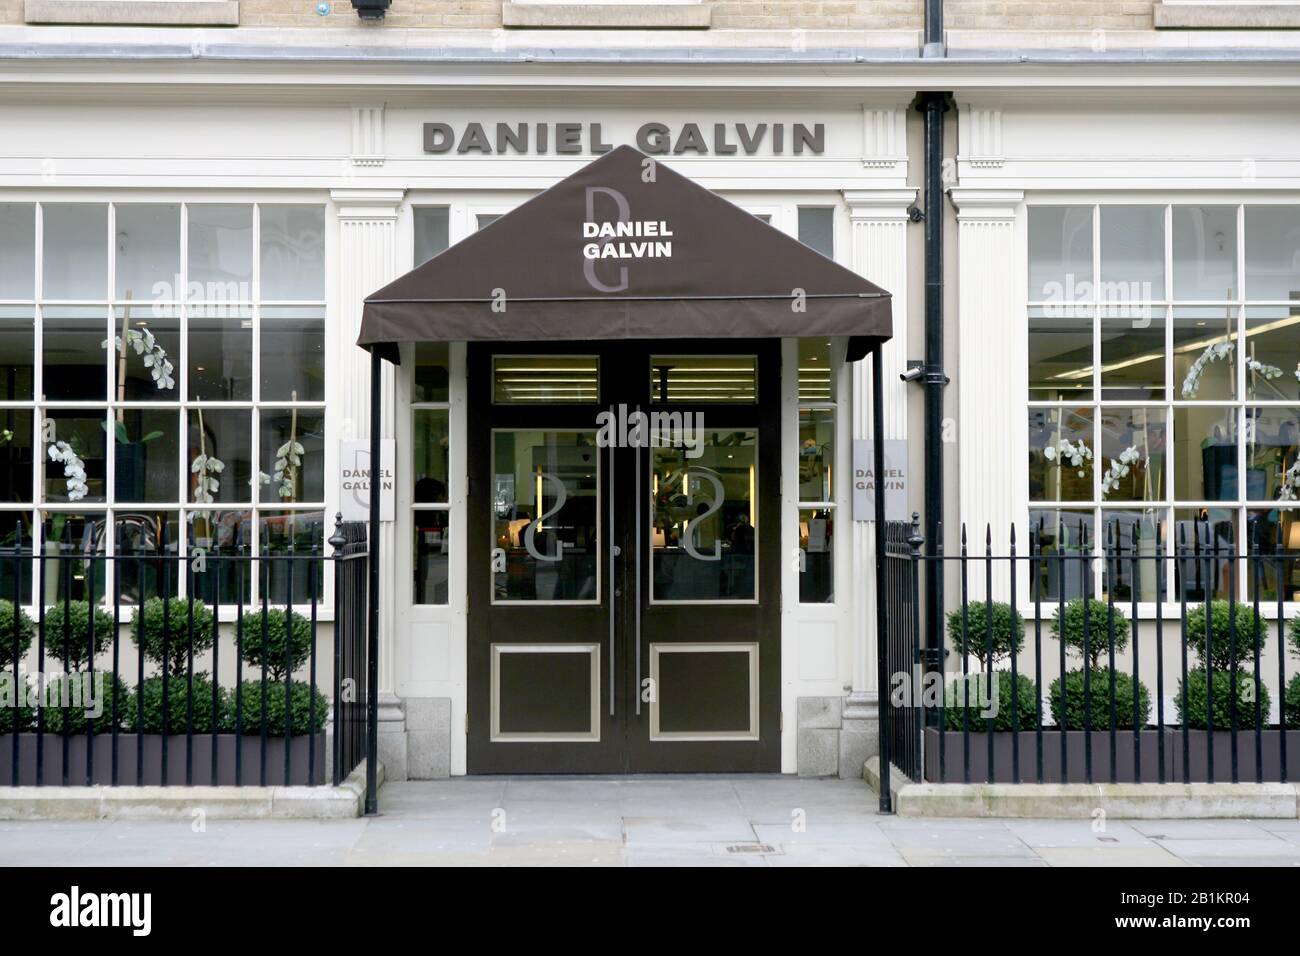 Daniel Galvin, hairdresser to HRH Princess Diana and other celebrities, George Street, London, England Stock Photo